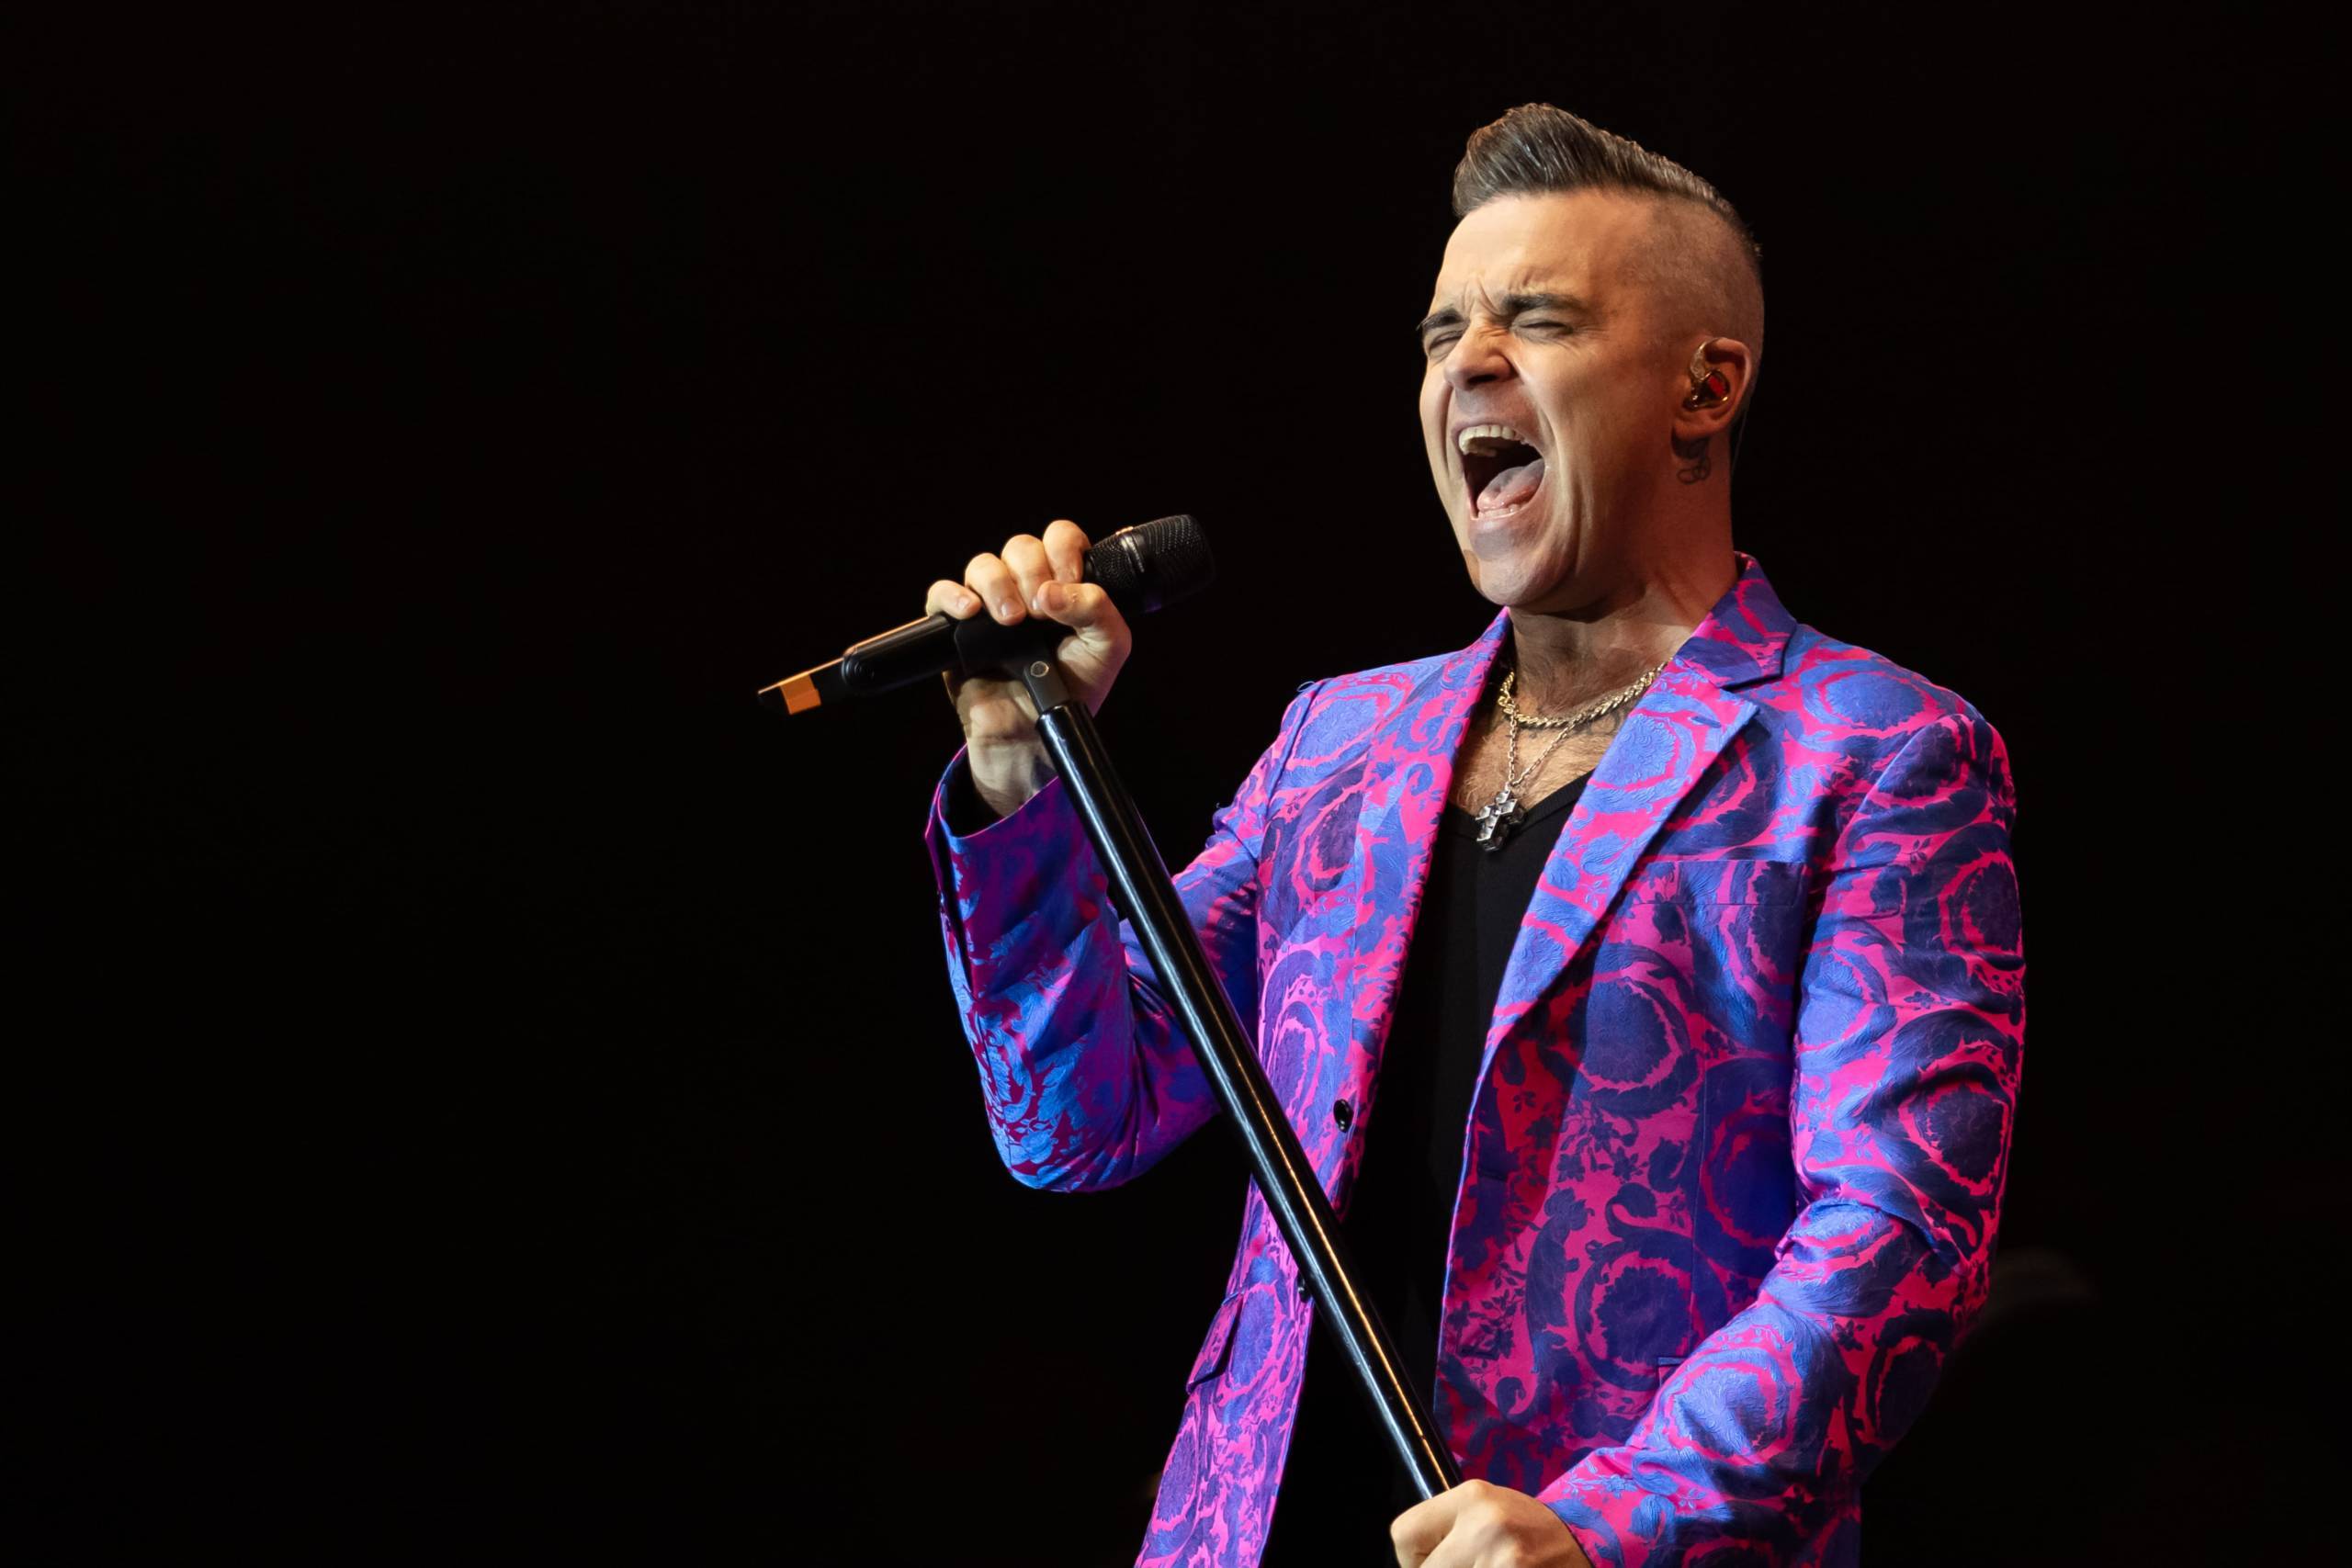 Robbie Williams 2019 Live in Manchester